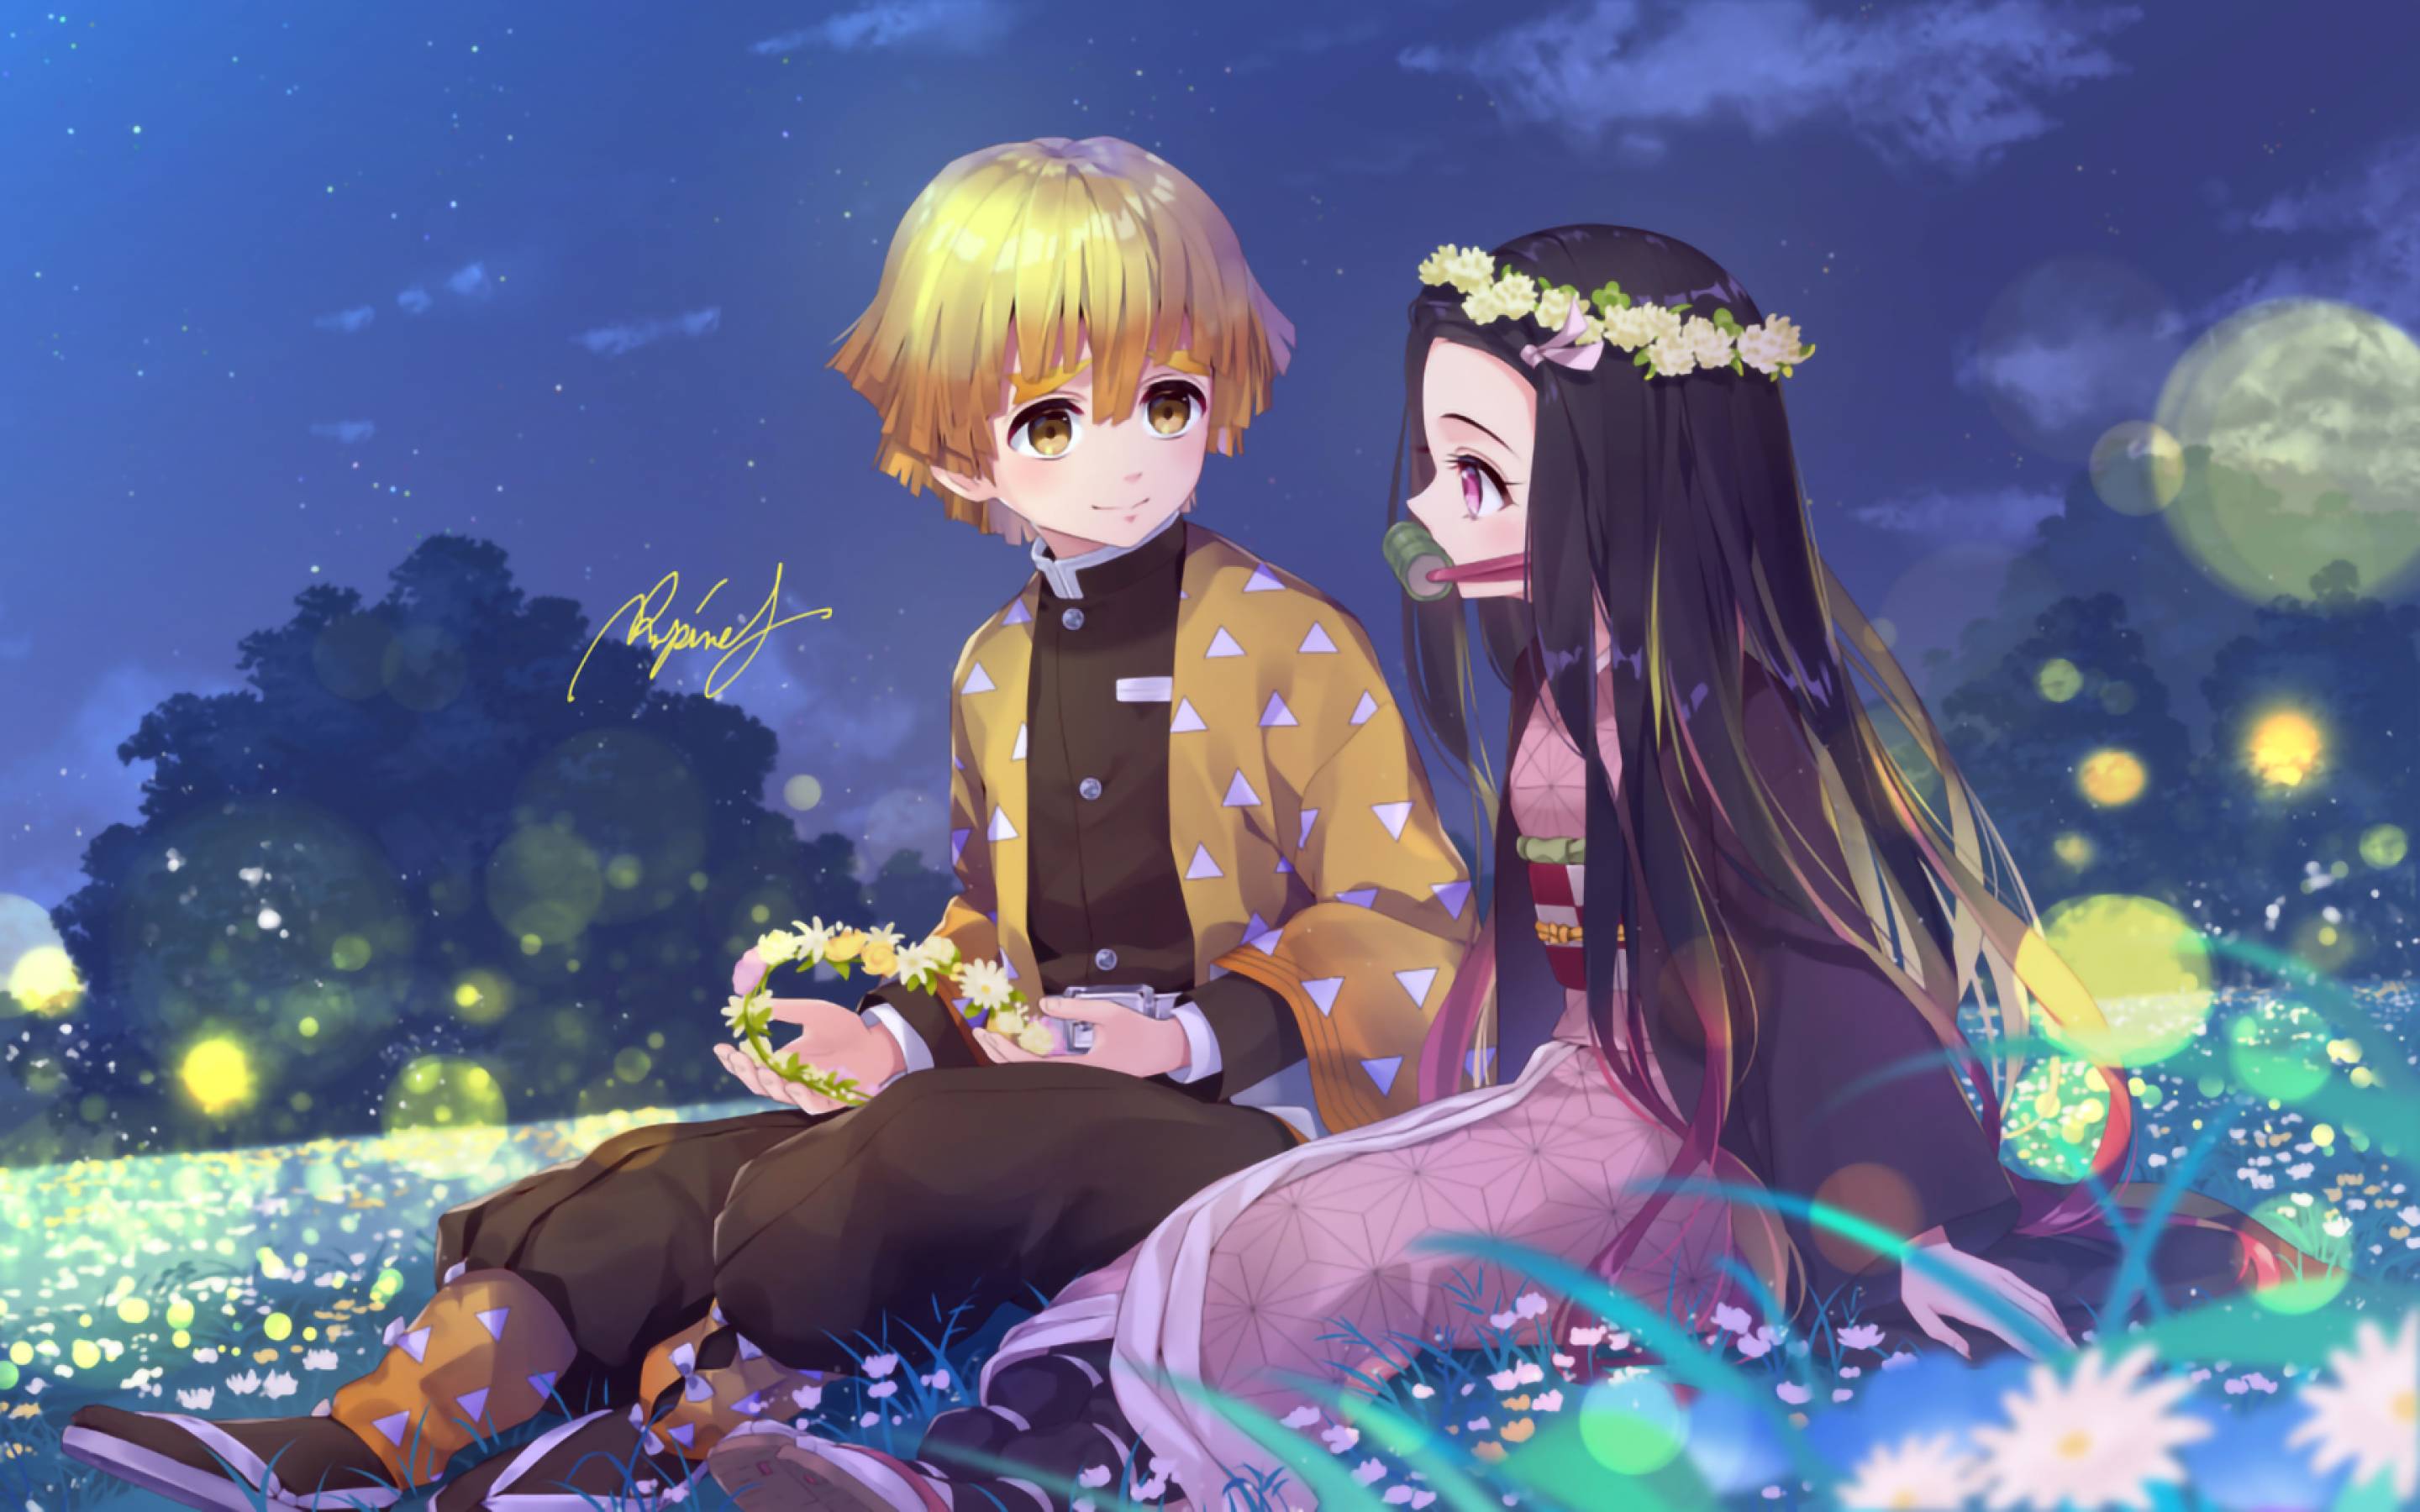 Anime couple sitting on the grass with flowers - Nezuko